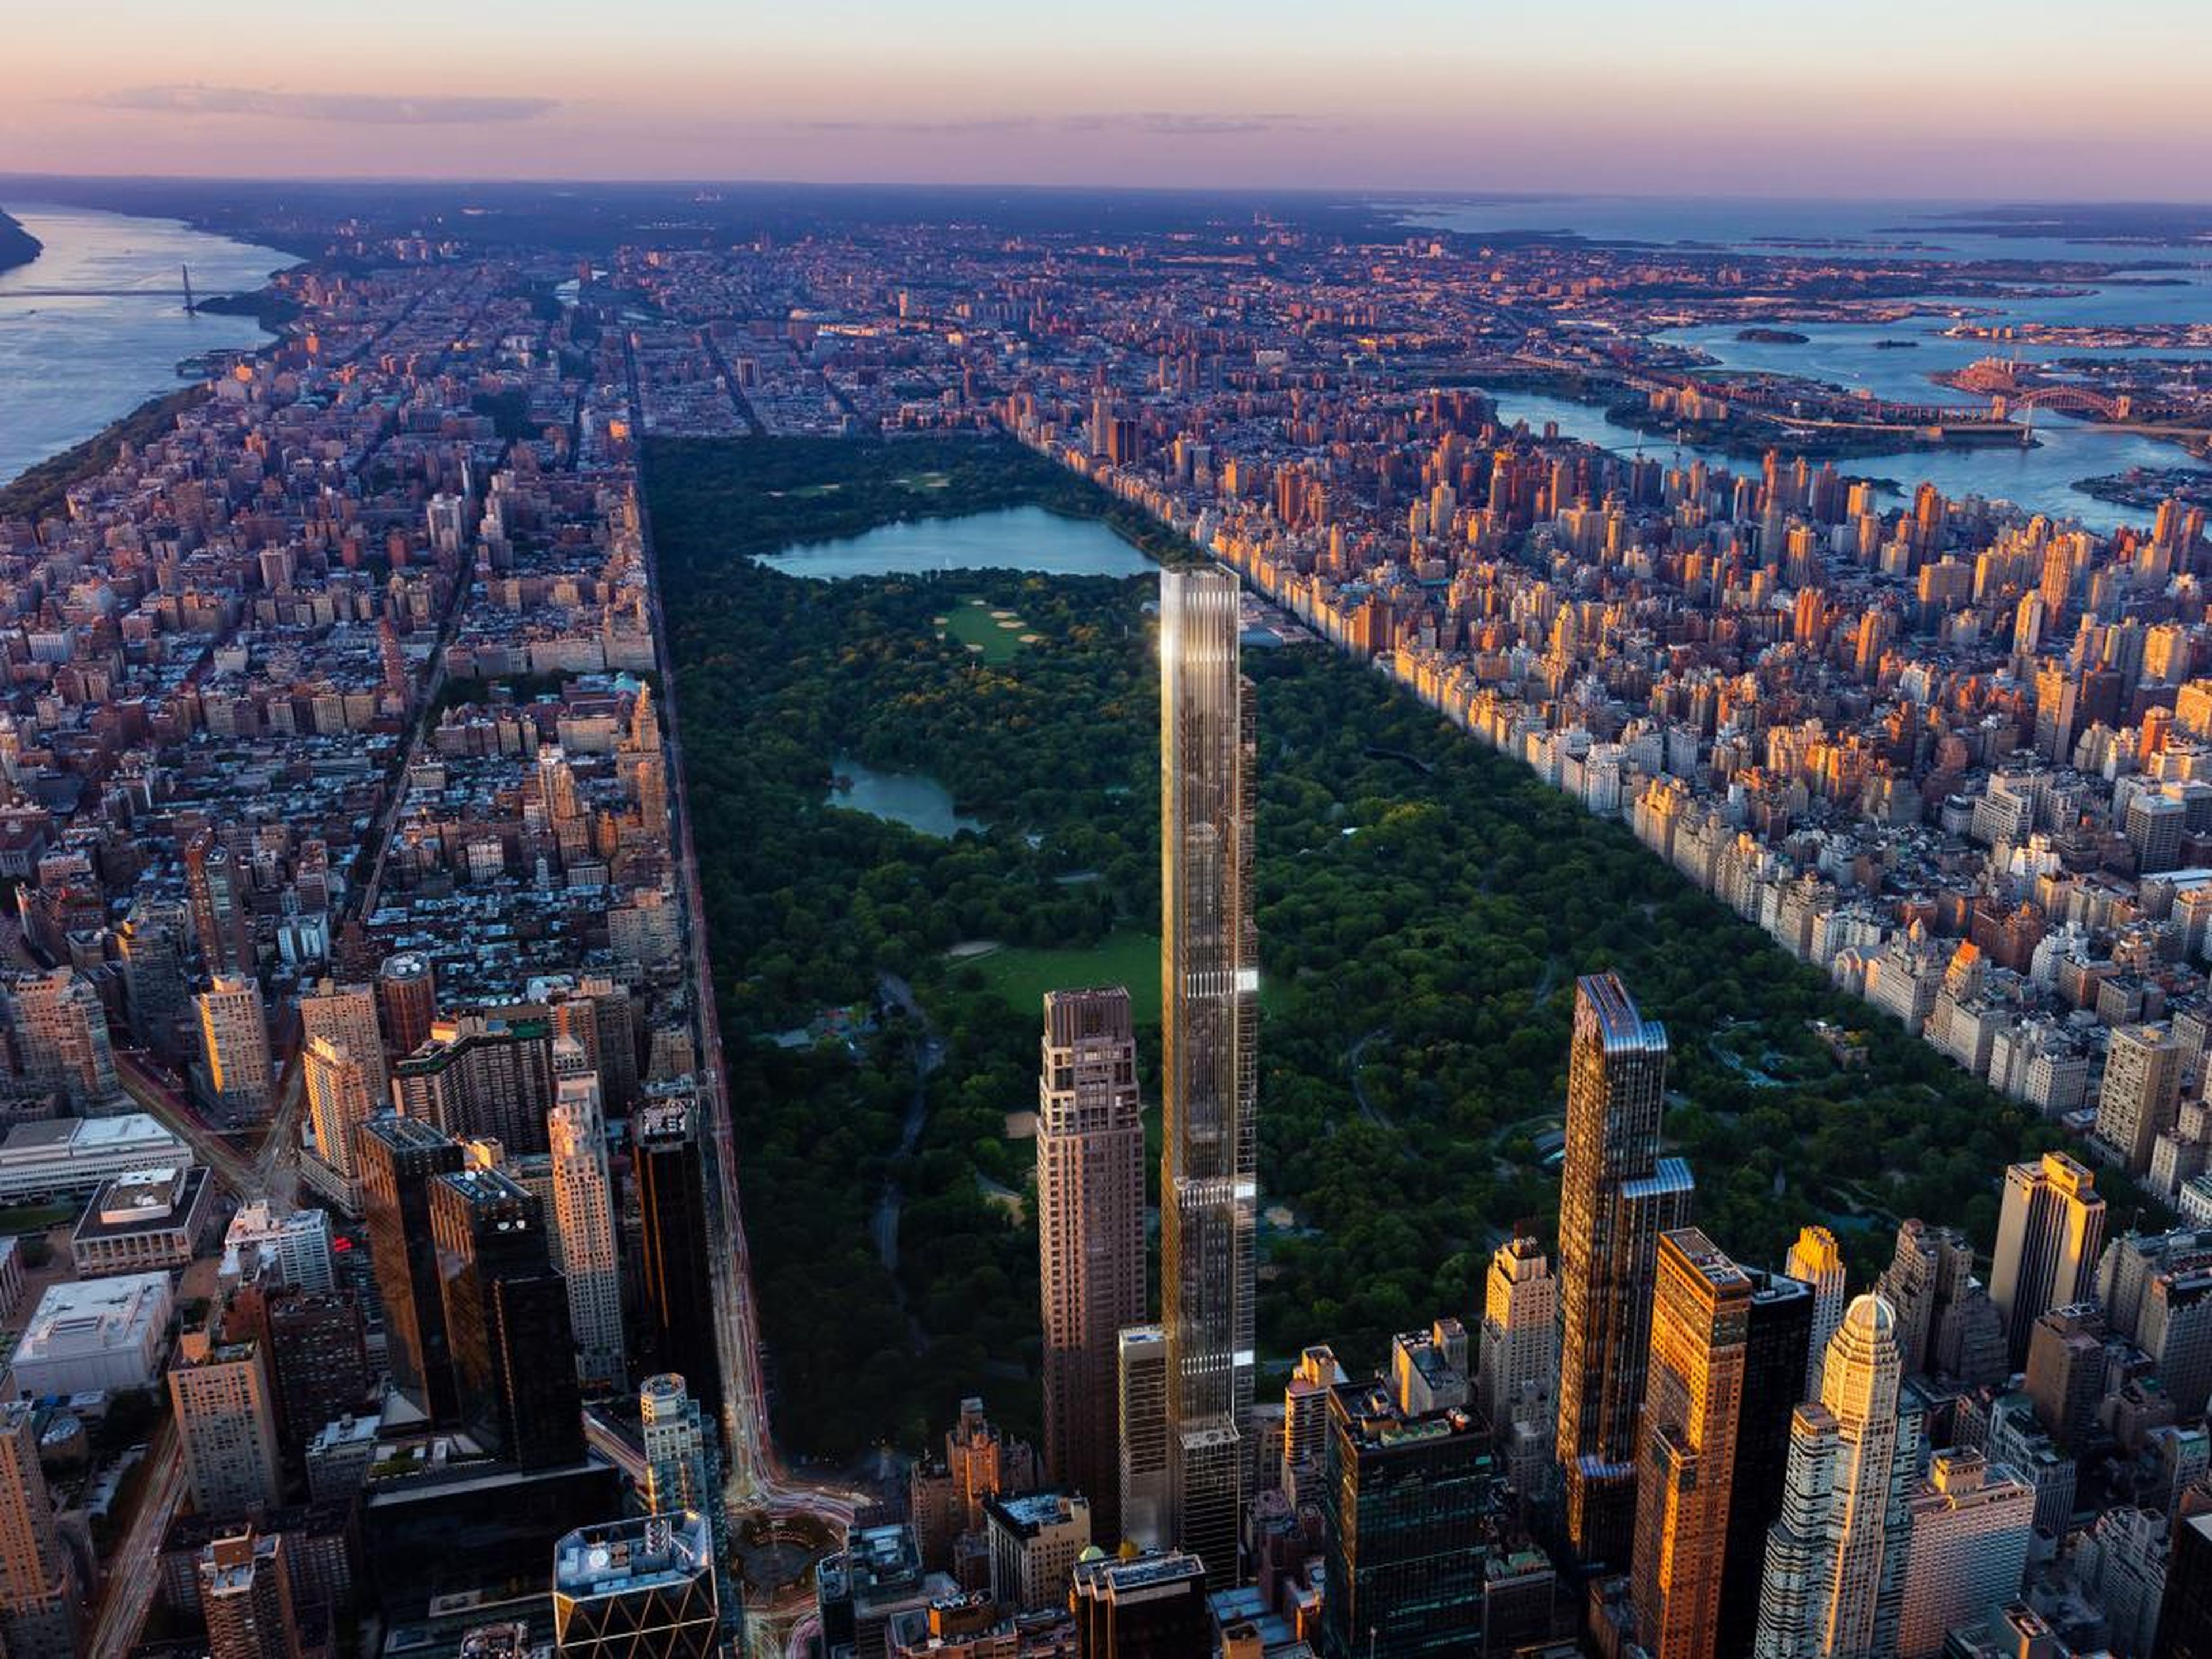 Though 432 Park Avenue holds the title of tallest residential building in the city now, it will soon be outstripped by Central Park Tower, which will be 1,550 feet tall when completed.